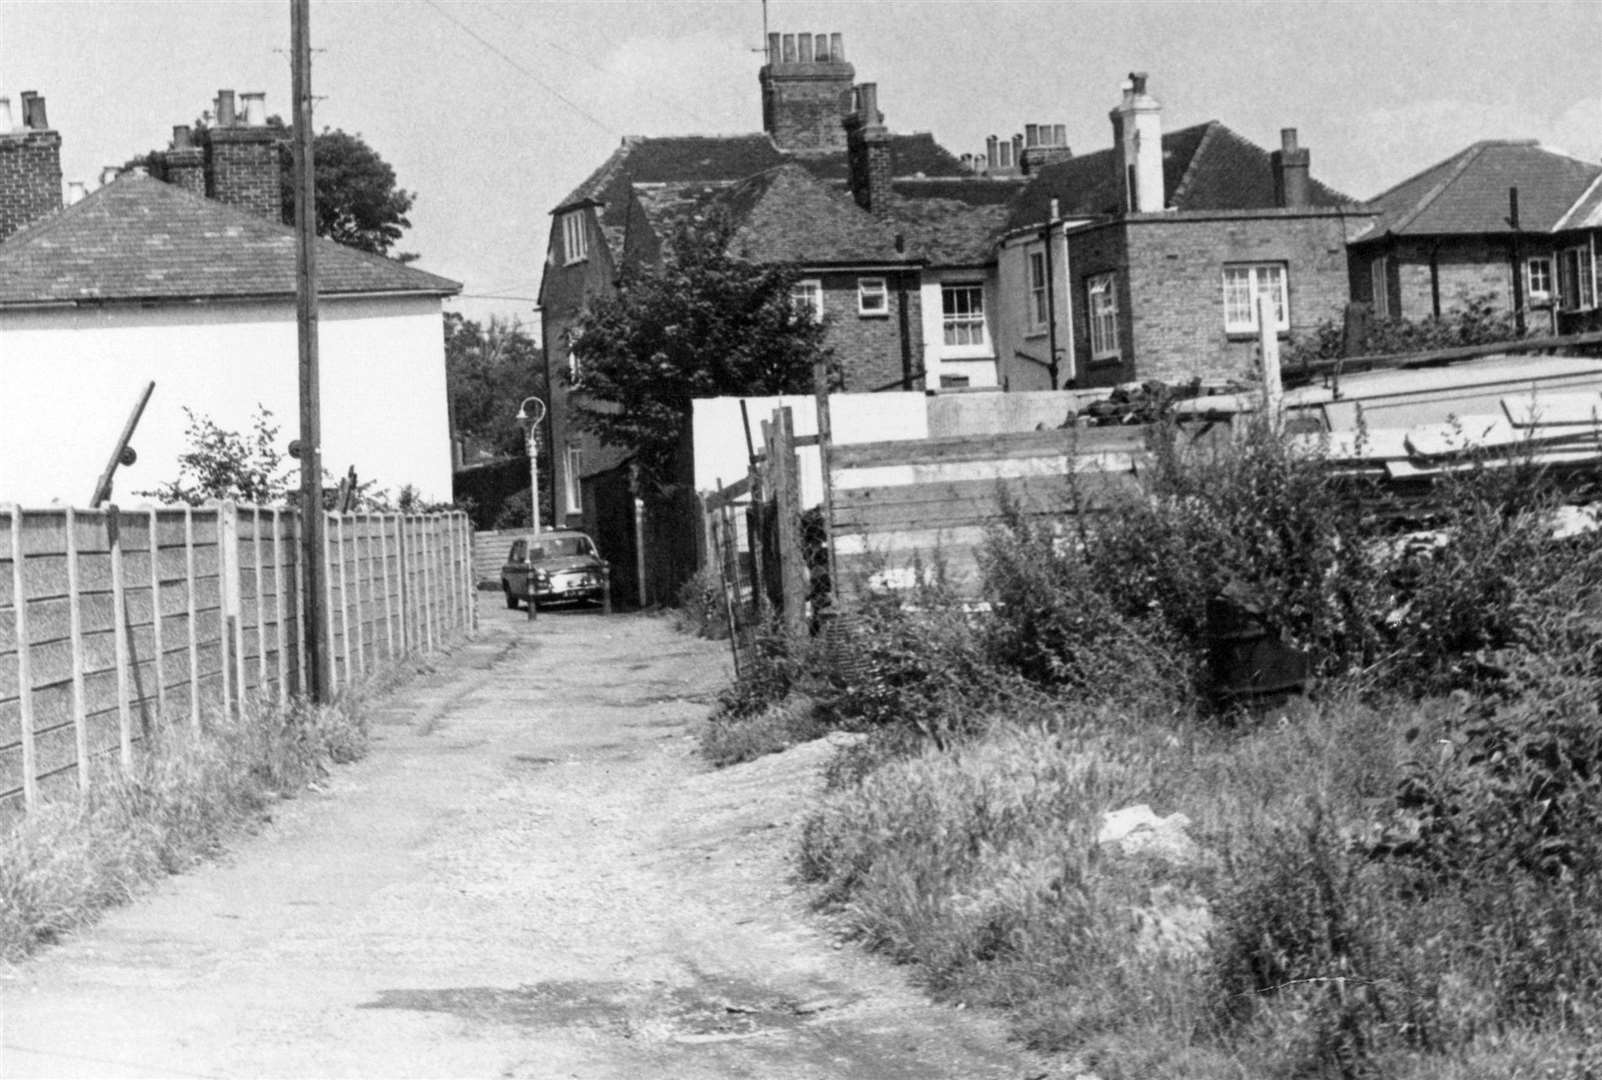 Gravel Walk, 1972. A rare view showing Gravel Walk in the early 1970’s before the area was given over to parking. The rear of the recently demolished Prince Albert and Prince of Orange public houses can be seen on the right, with the long lost Engineer public house in the white building on the left. Today there is no trace of Gravel Walk, but plenty of colourful memories among those who remember it. Picture: Steve Salter